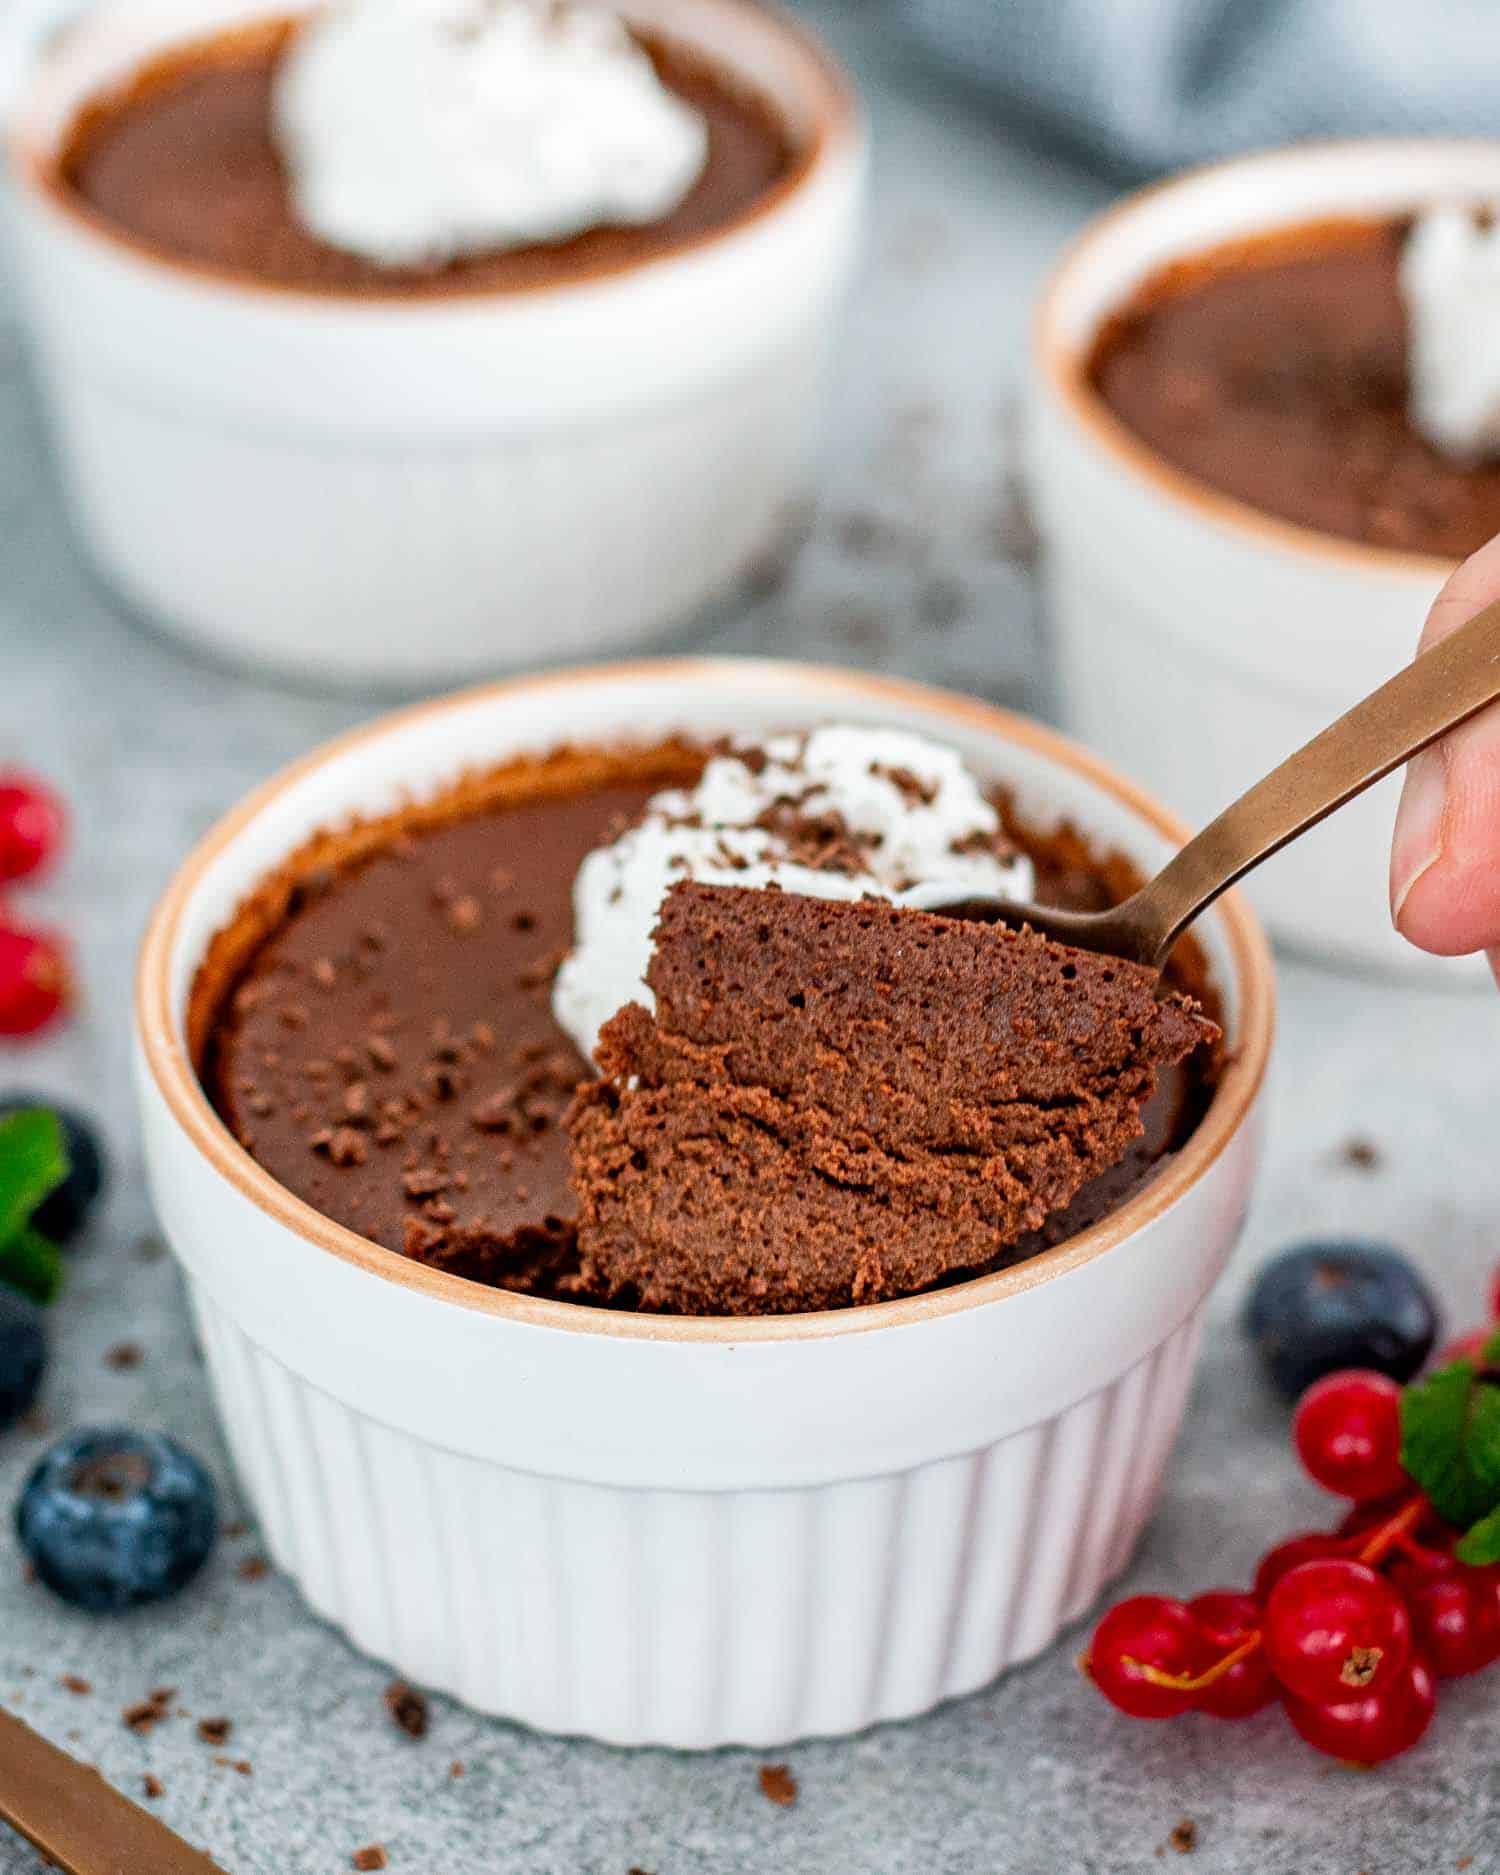 Chocolate pots de crème topped with whipped cream, garnished with fresh berries and chocolate shavings.